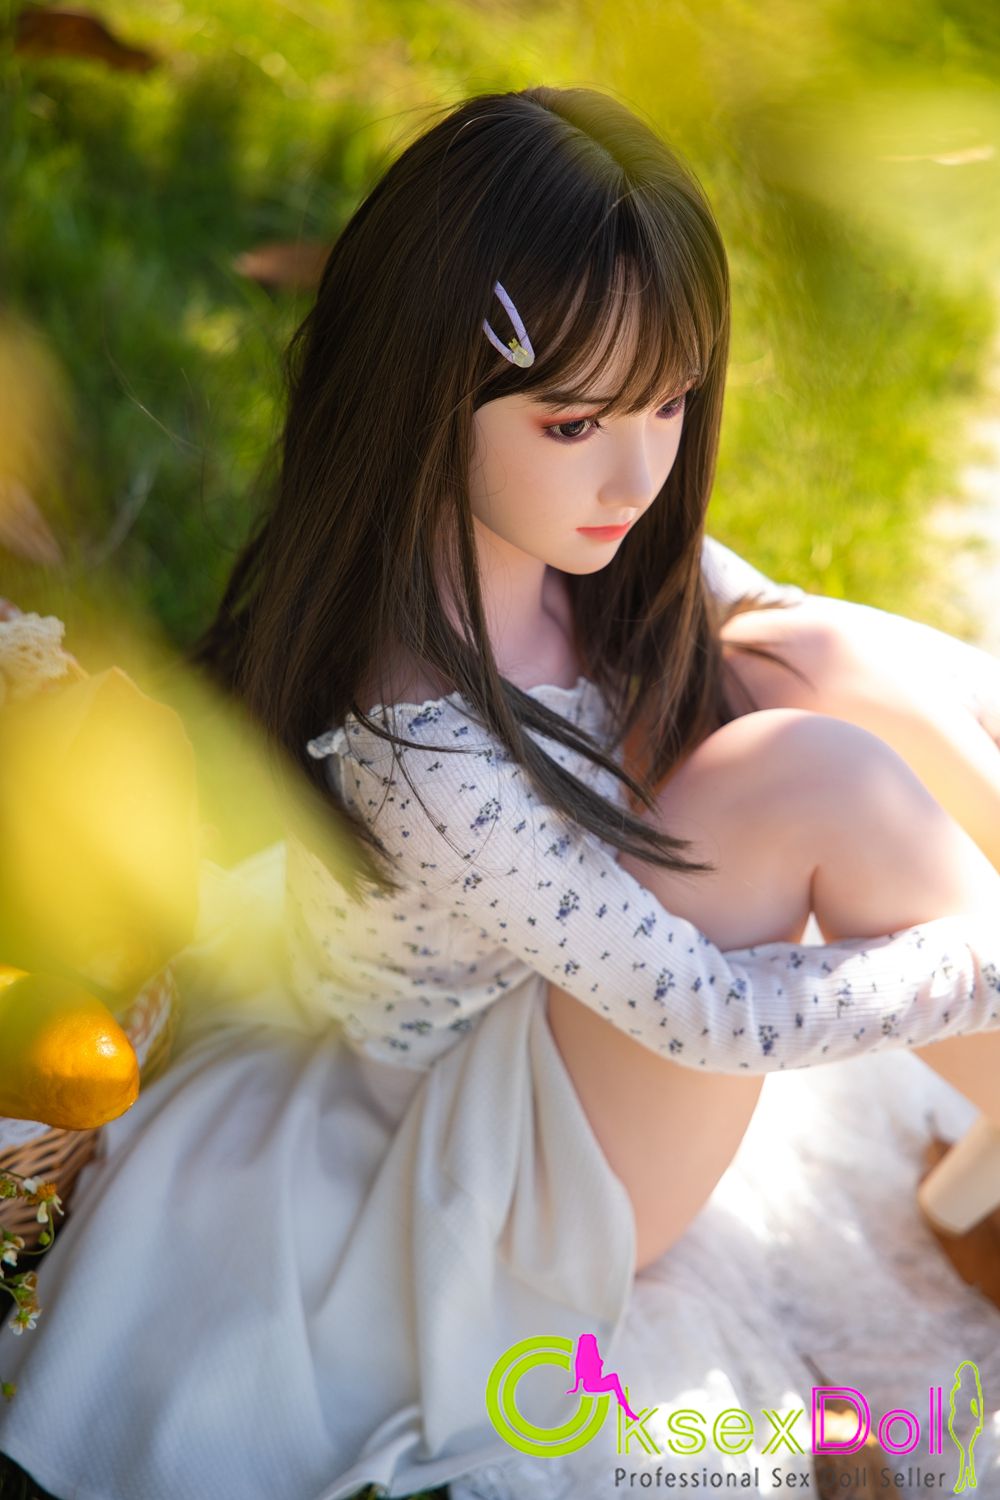 XY doll Pictures